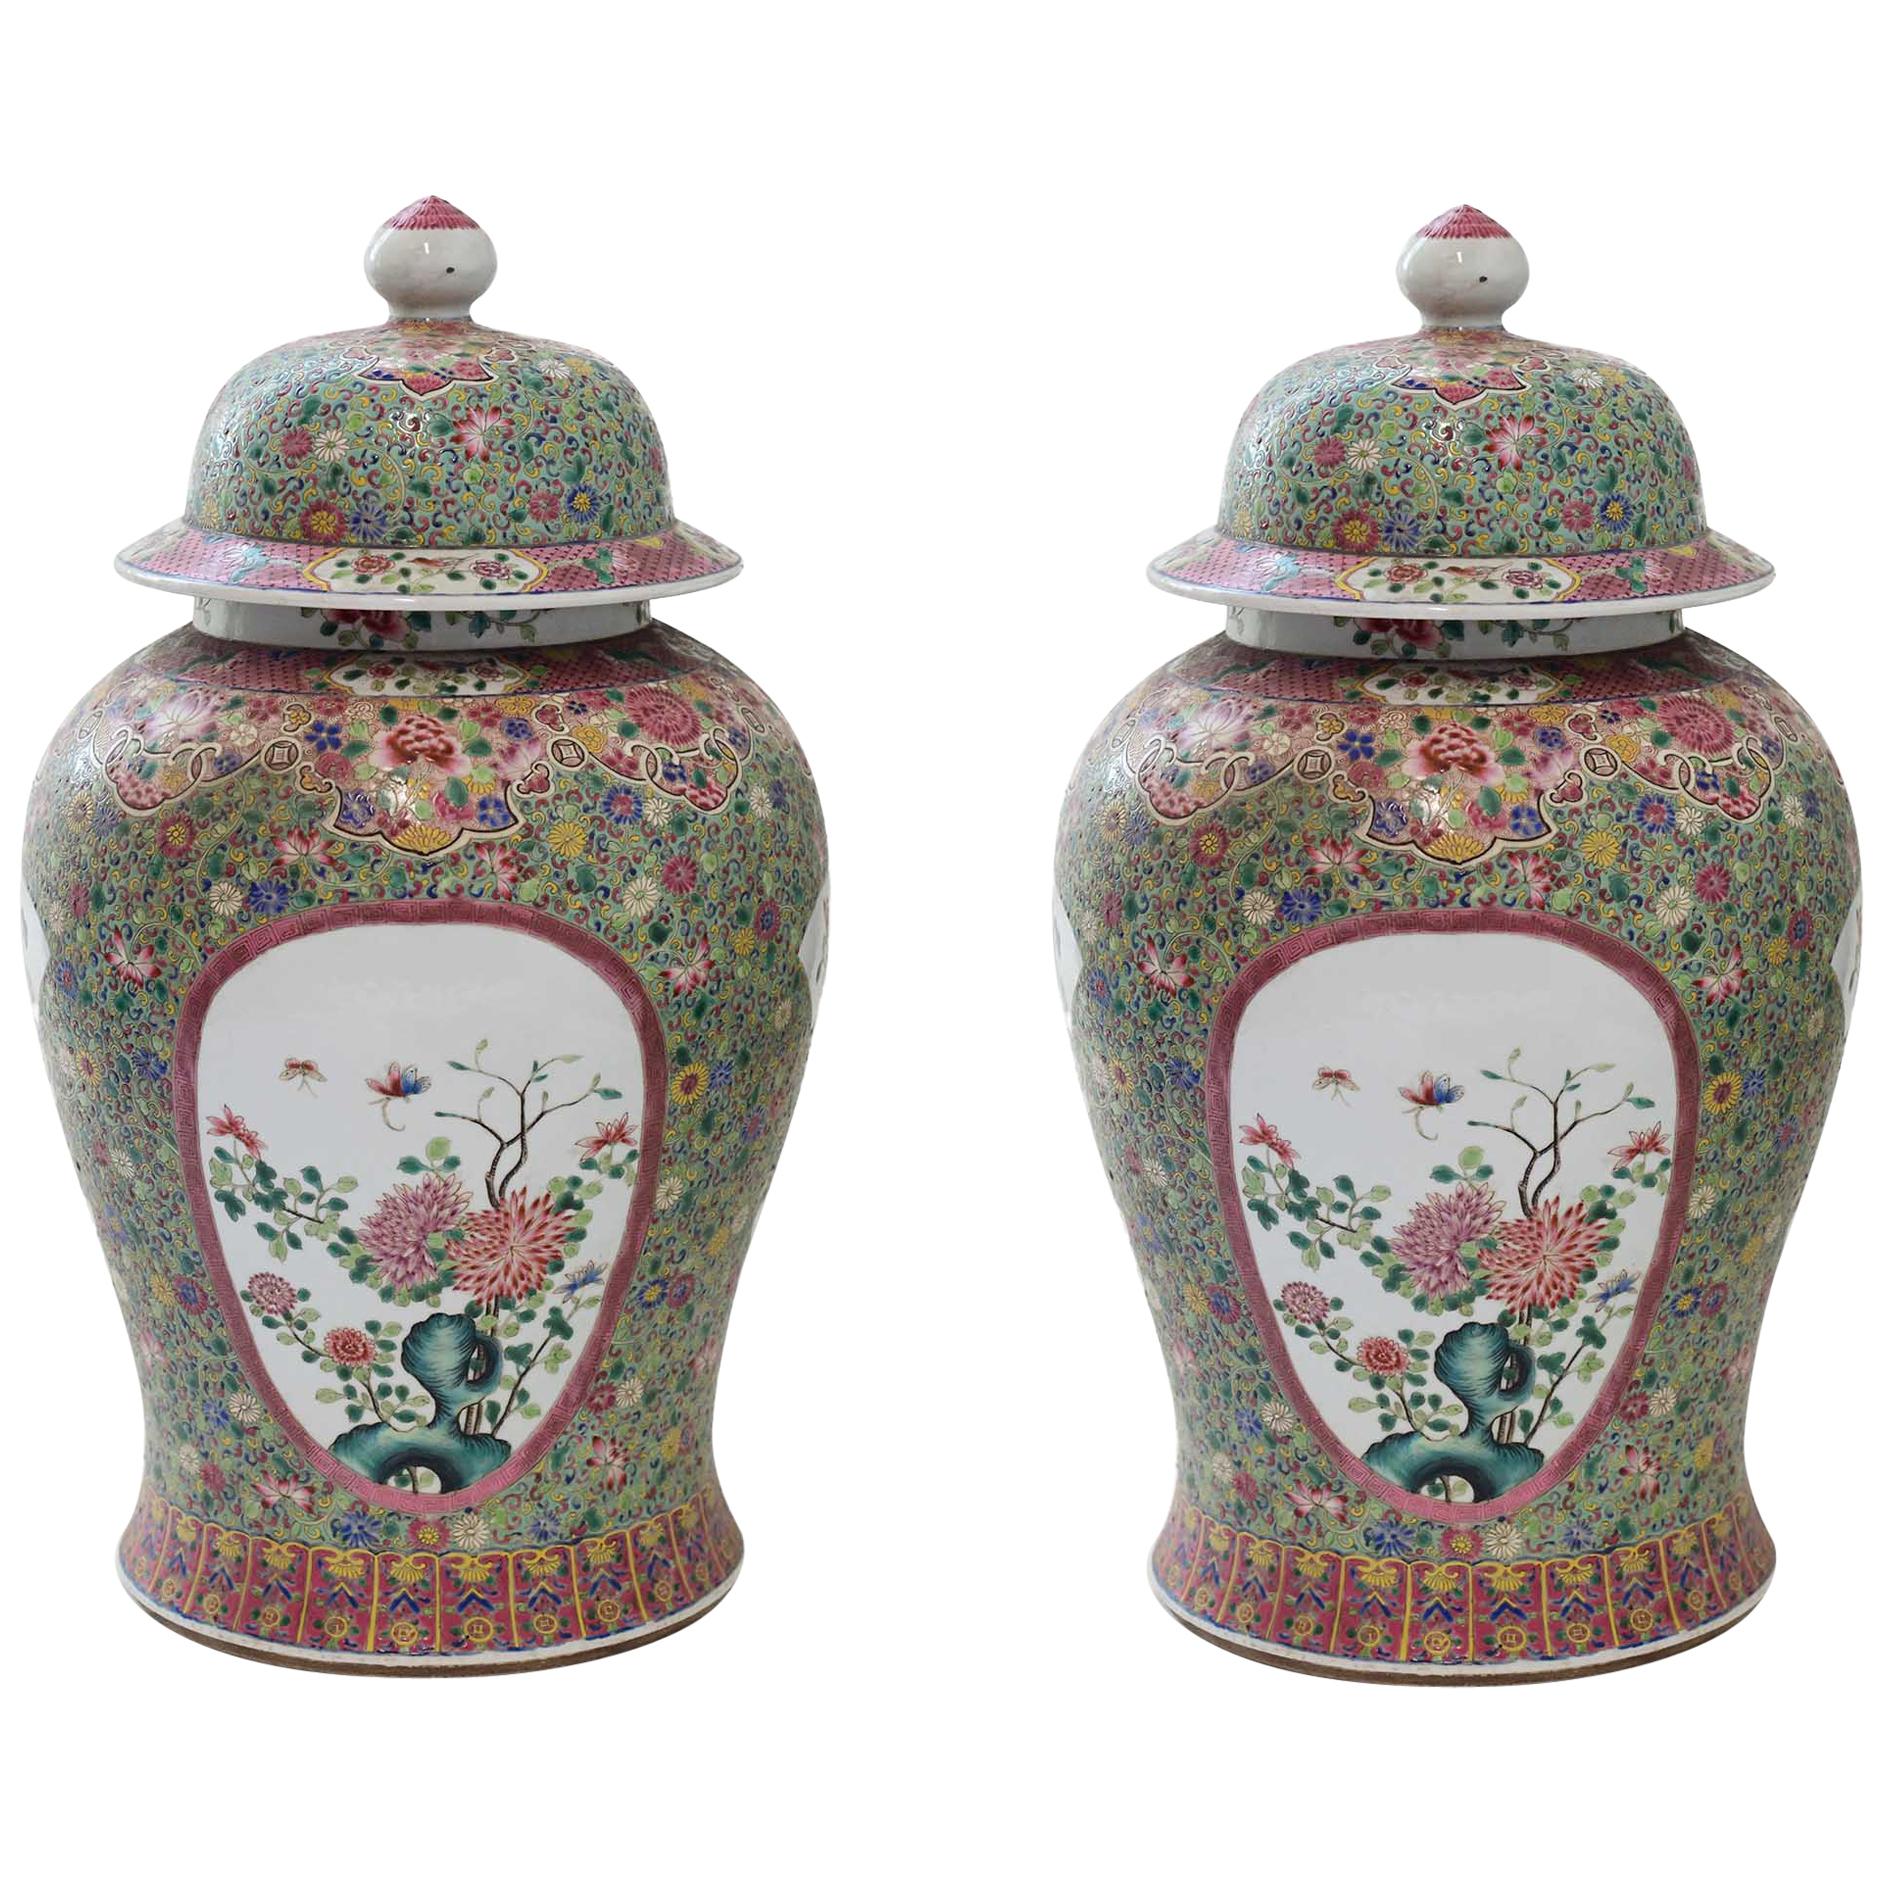 Pair of Famille Rose Porcelain Vases with Covers